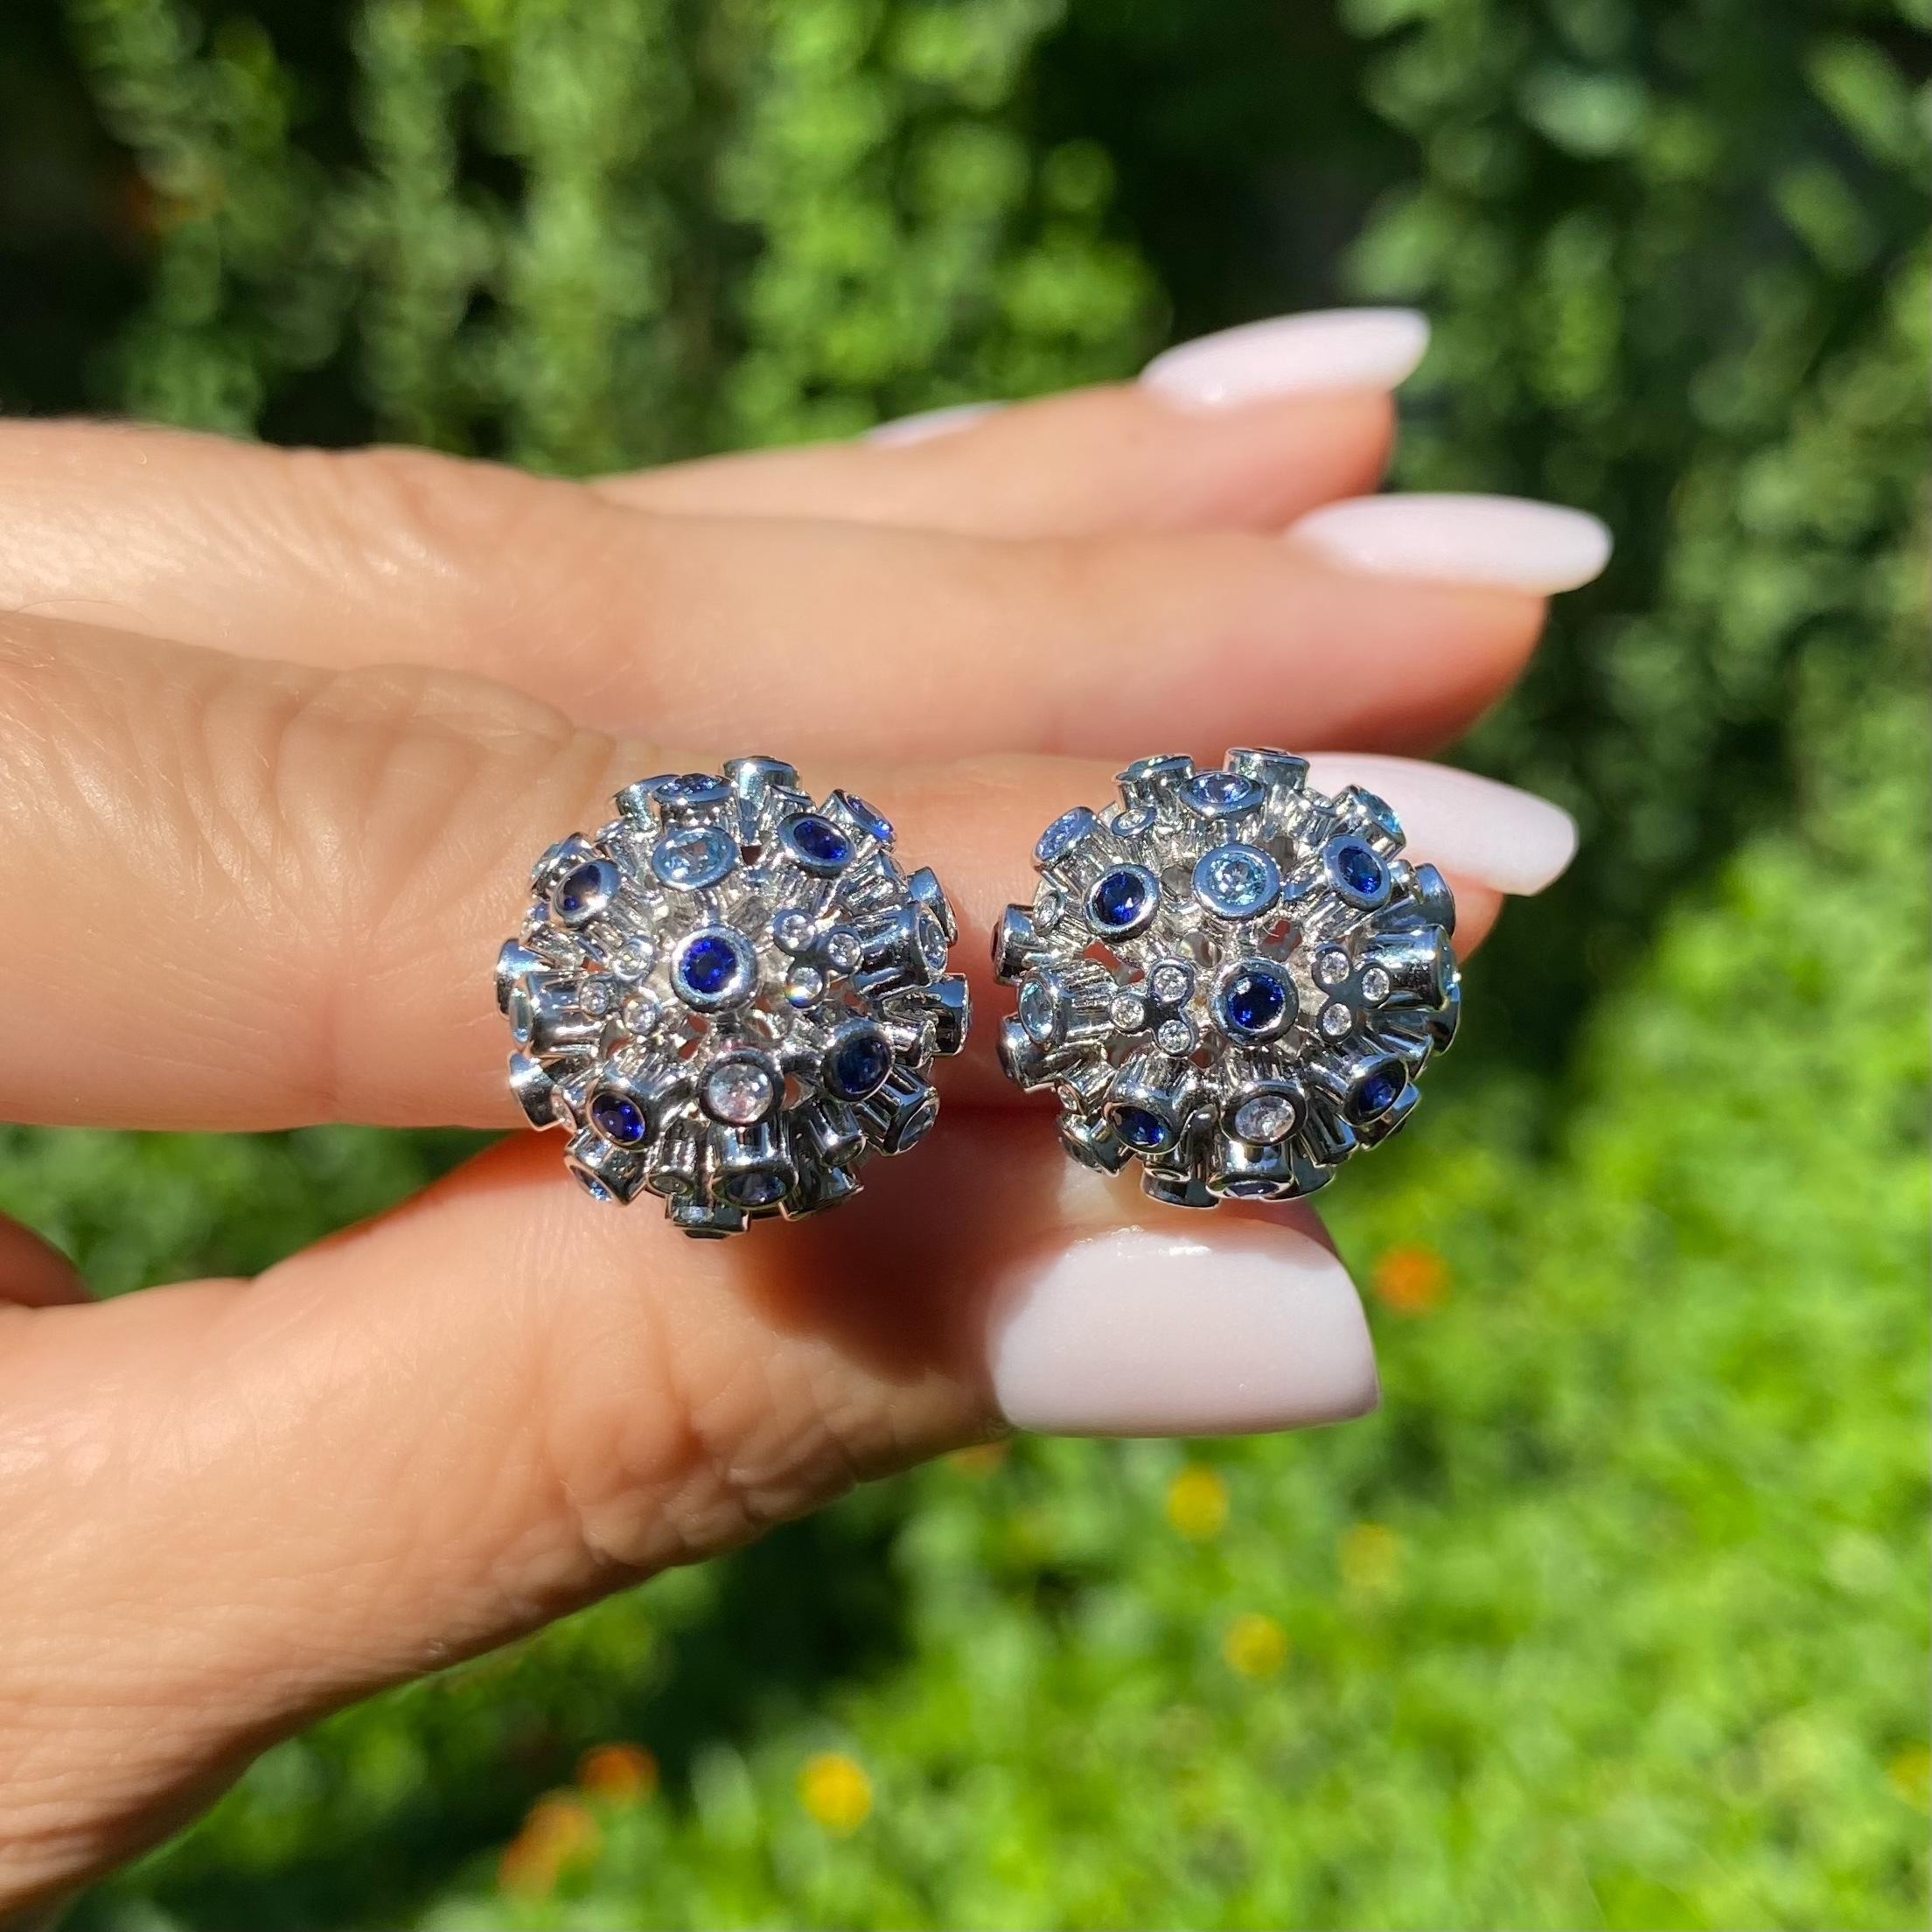 Beautiful and Stylish Dome Cluster Earrings. Unique design. Each earring securely set with Sapphires and 0.08tcw Diamonds. Hand crafted 18K White Gold mounting. Post and Clip system. Approx. dimensions: 0.67” diameter x 0.58” high. Classic and